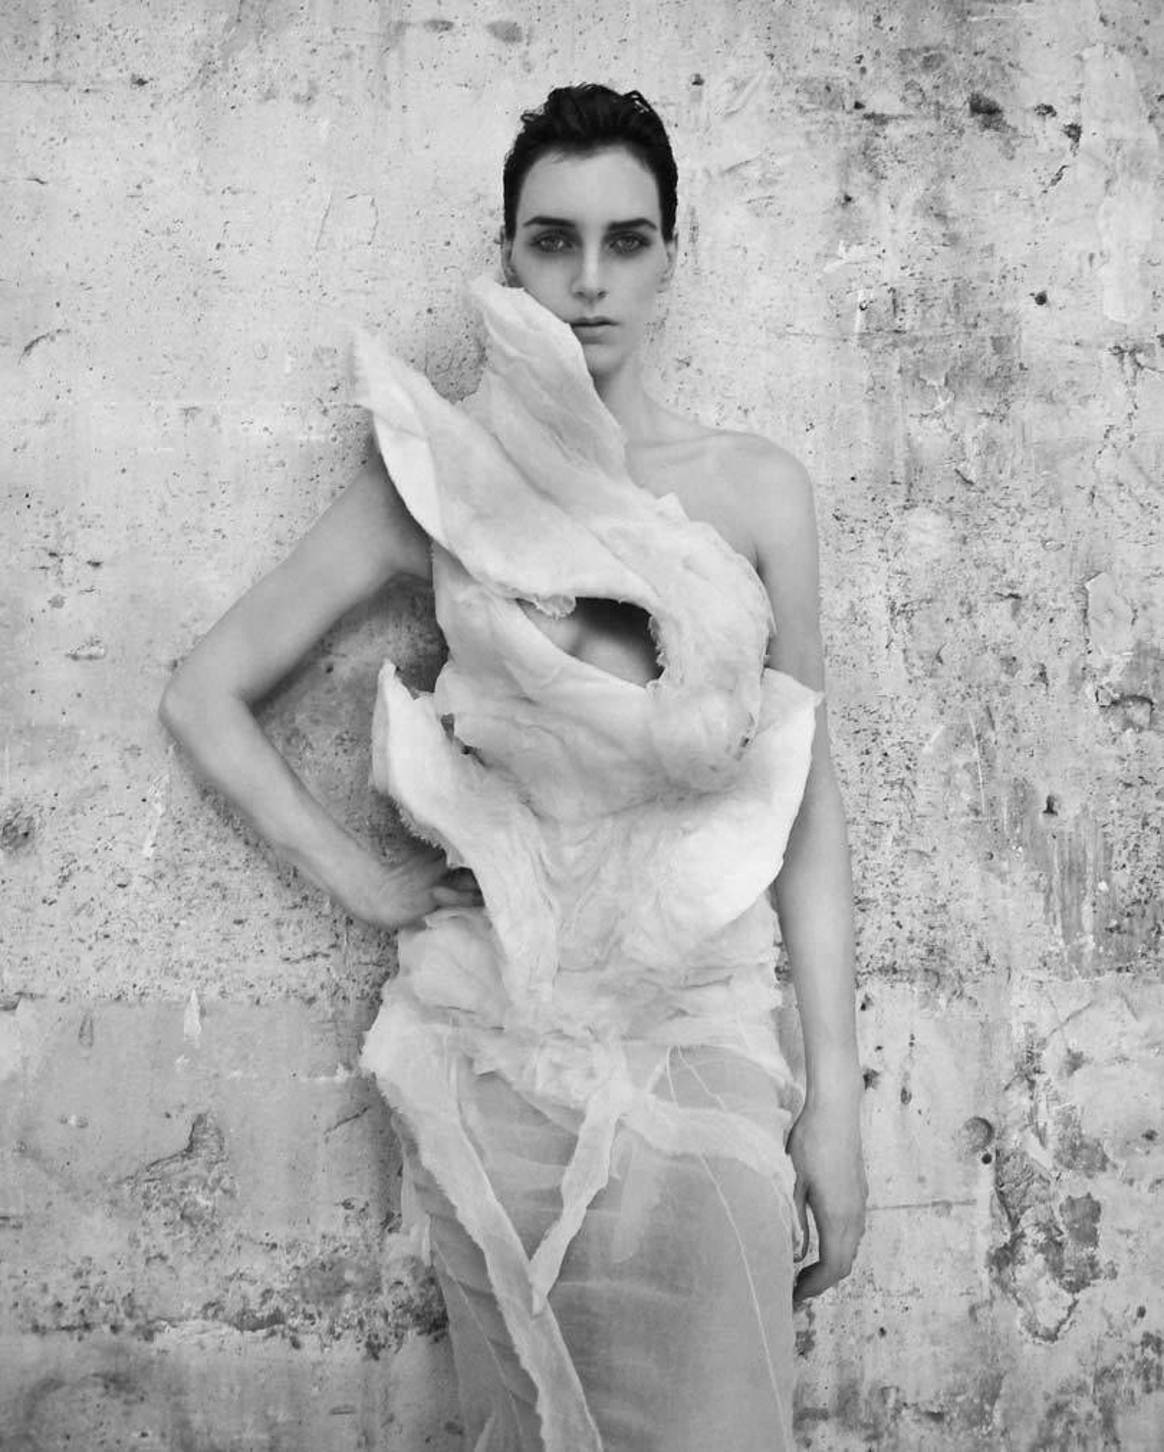 Olivier Theyskens’ comeback: “I work from a form of beauty”